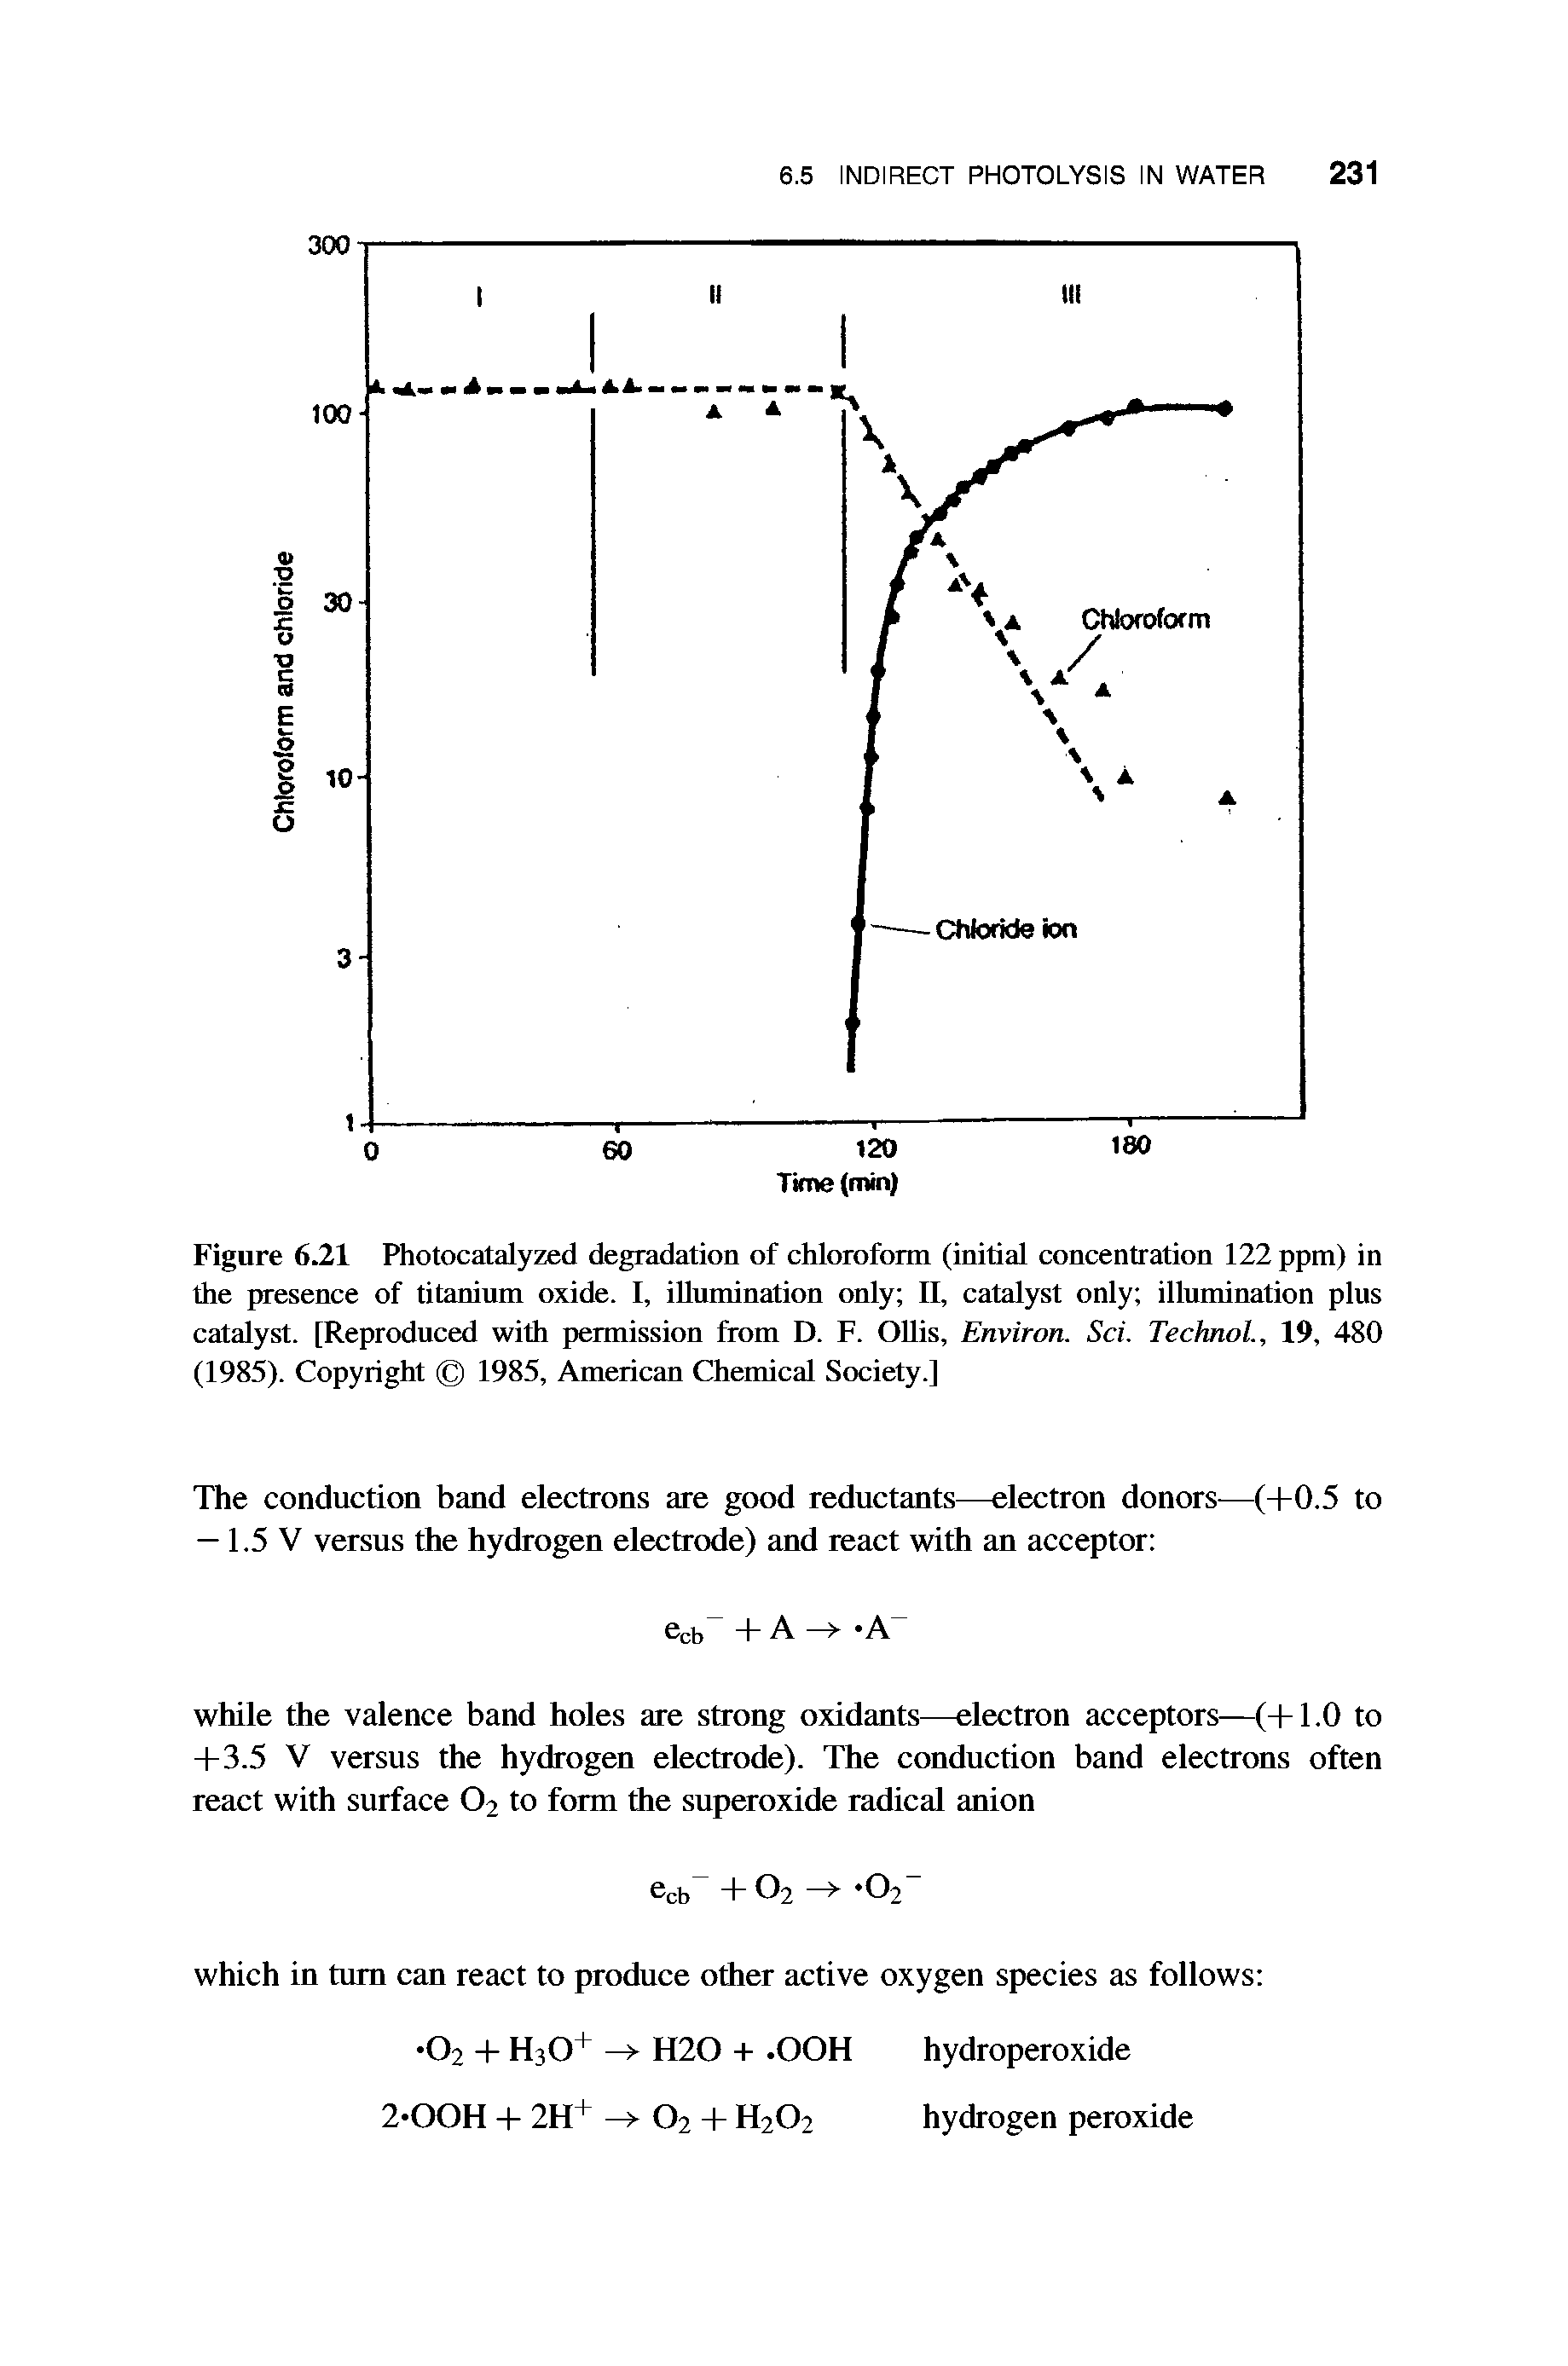 Figure 6.21 Photocatalyzed degradation of chloroform (initial concentration 122 ppm) in the presence of titanium oxide. I, illumination only II, catalyst only illumination plus catalyst. [Reproduced with permission from D. F. OUis, Environ. Sci. Technol, 19, 480 (1985). Copyright 1985, American Chemical Society.]...